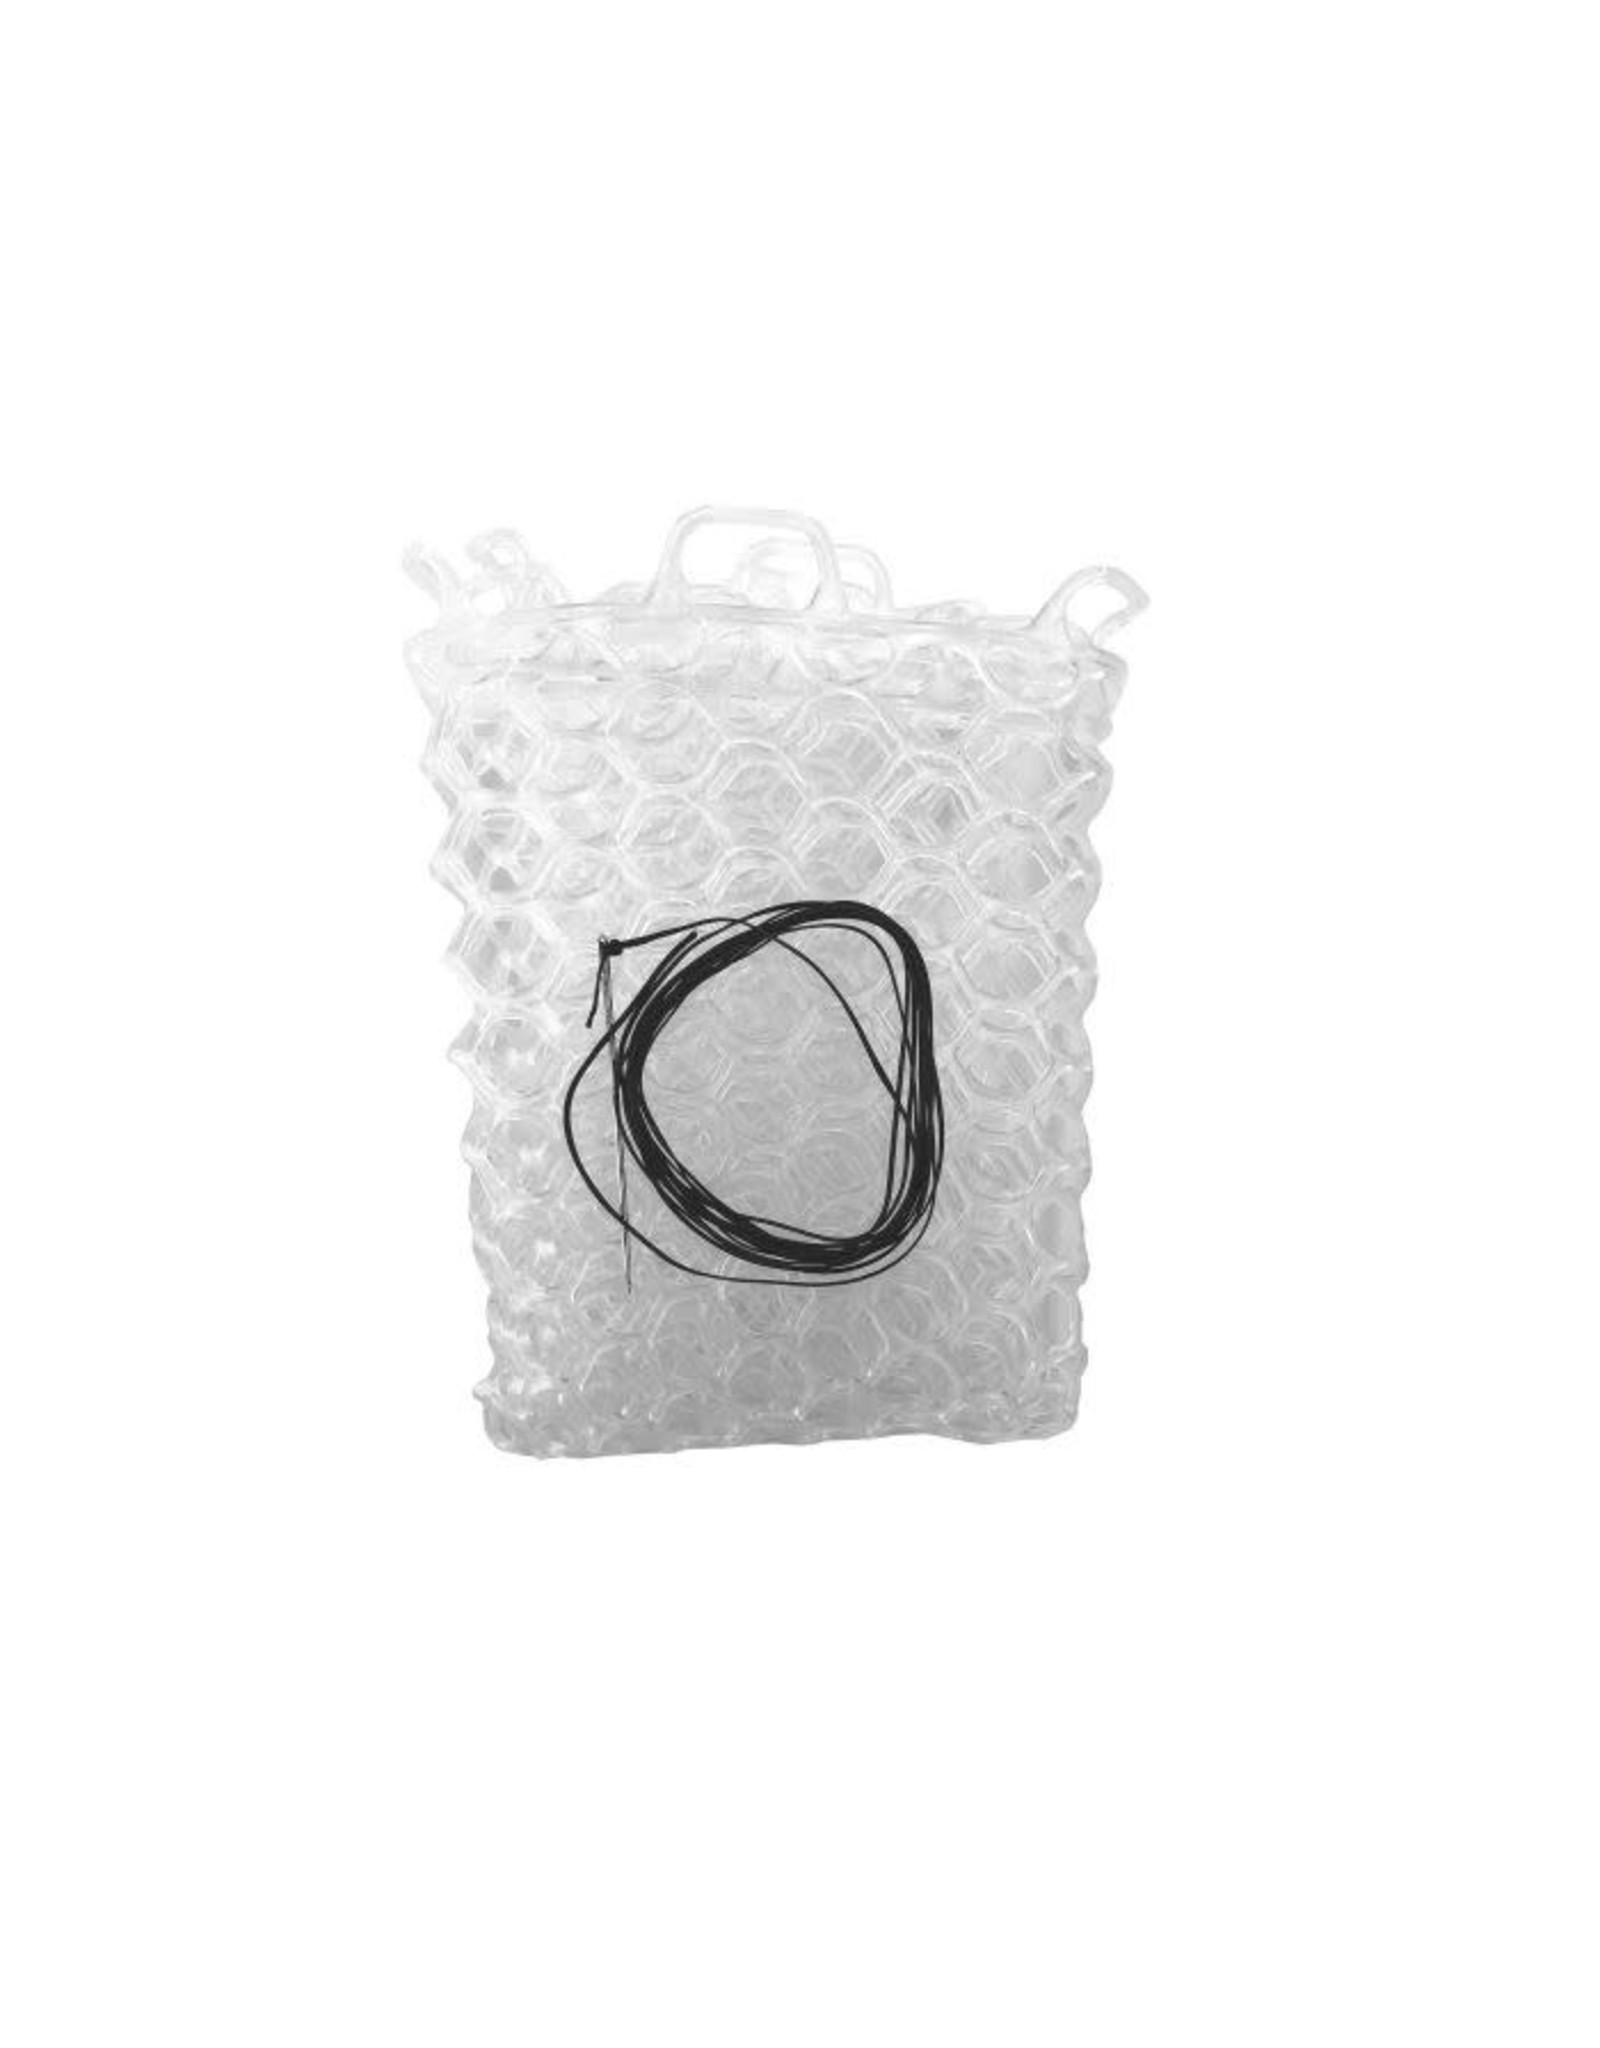 FISHPOND Nomad Replacement Rubber Net